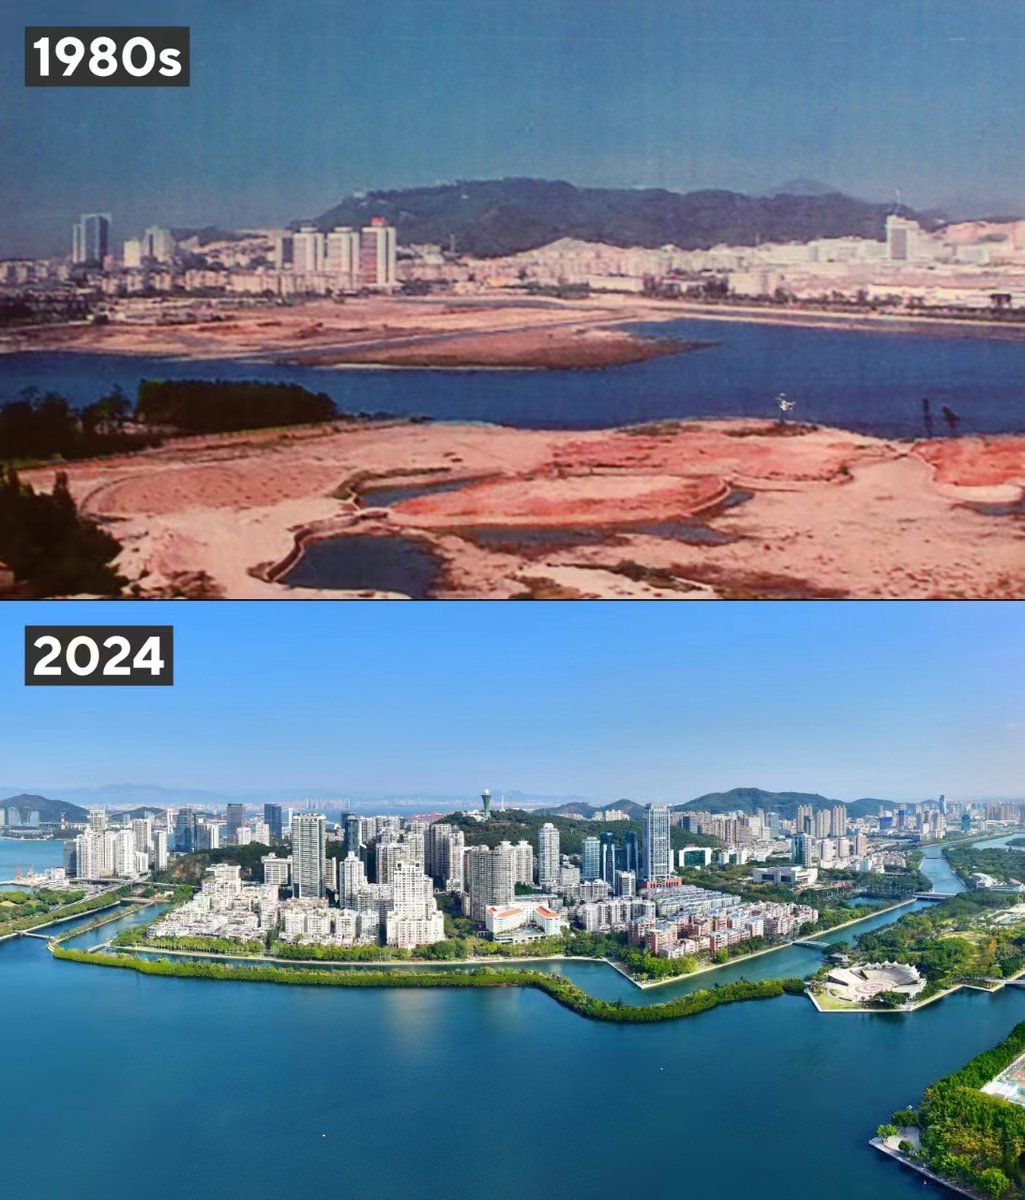 Yundang Lake has come a long way from its past as a neglected and polluted water body. Now, it’s #Xiamen’s pride — an “urban green lung” breathing life into the city. Clear waters, thriving greenery — it’s a living example of development done right. #GreenChina